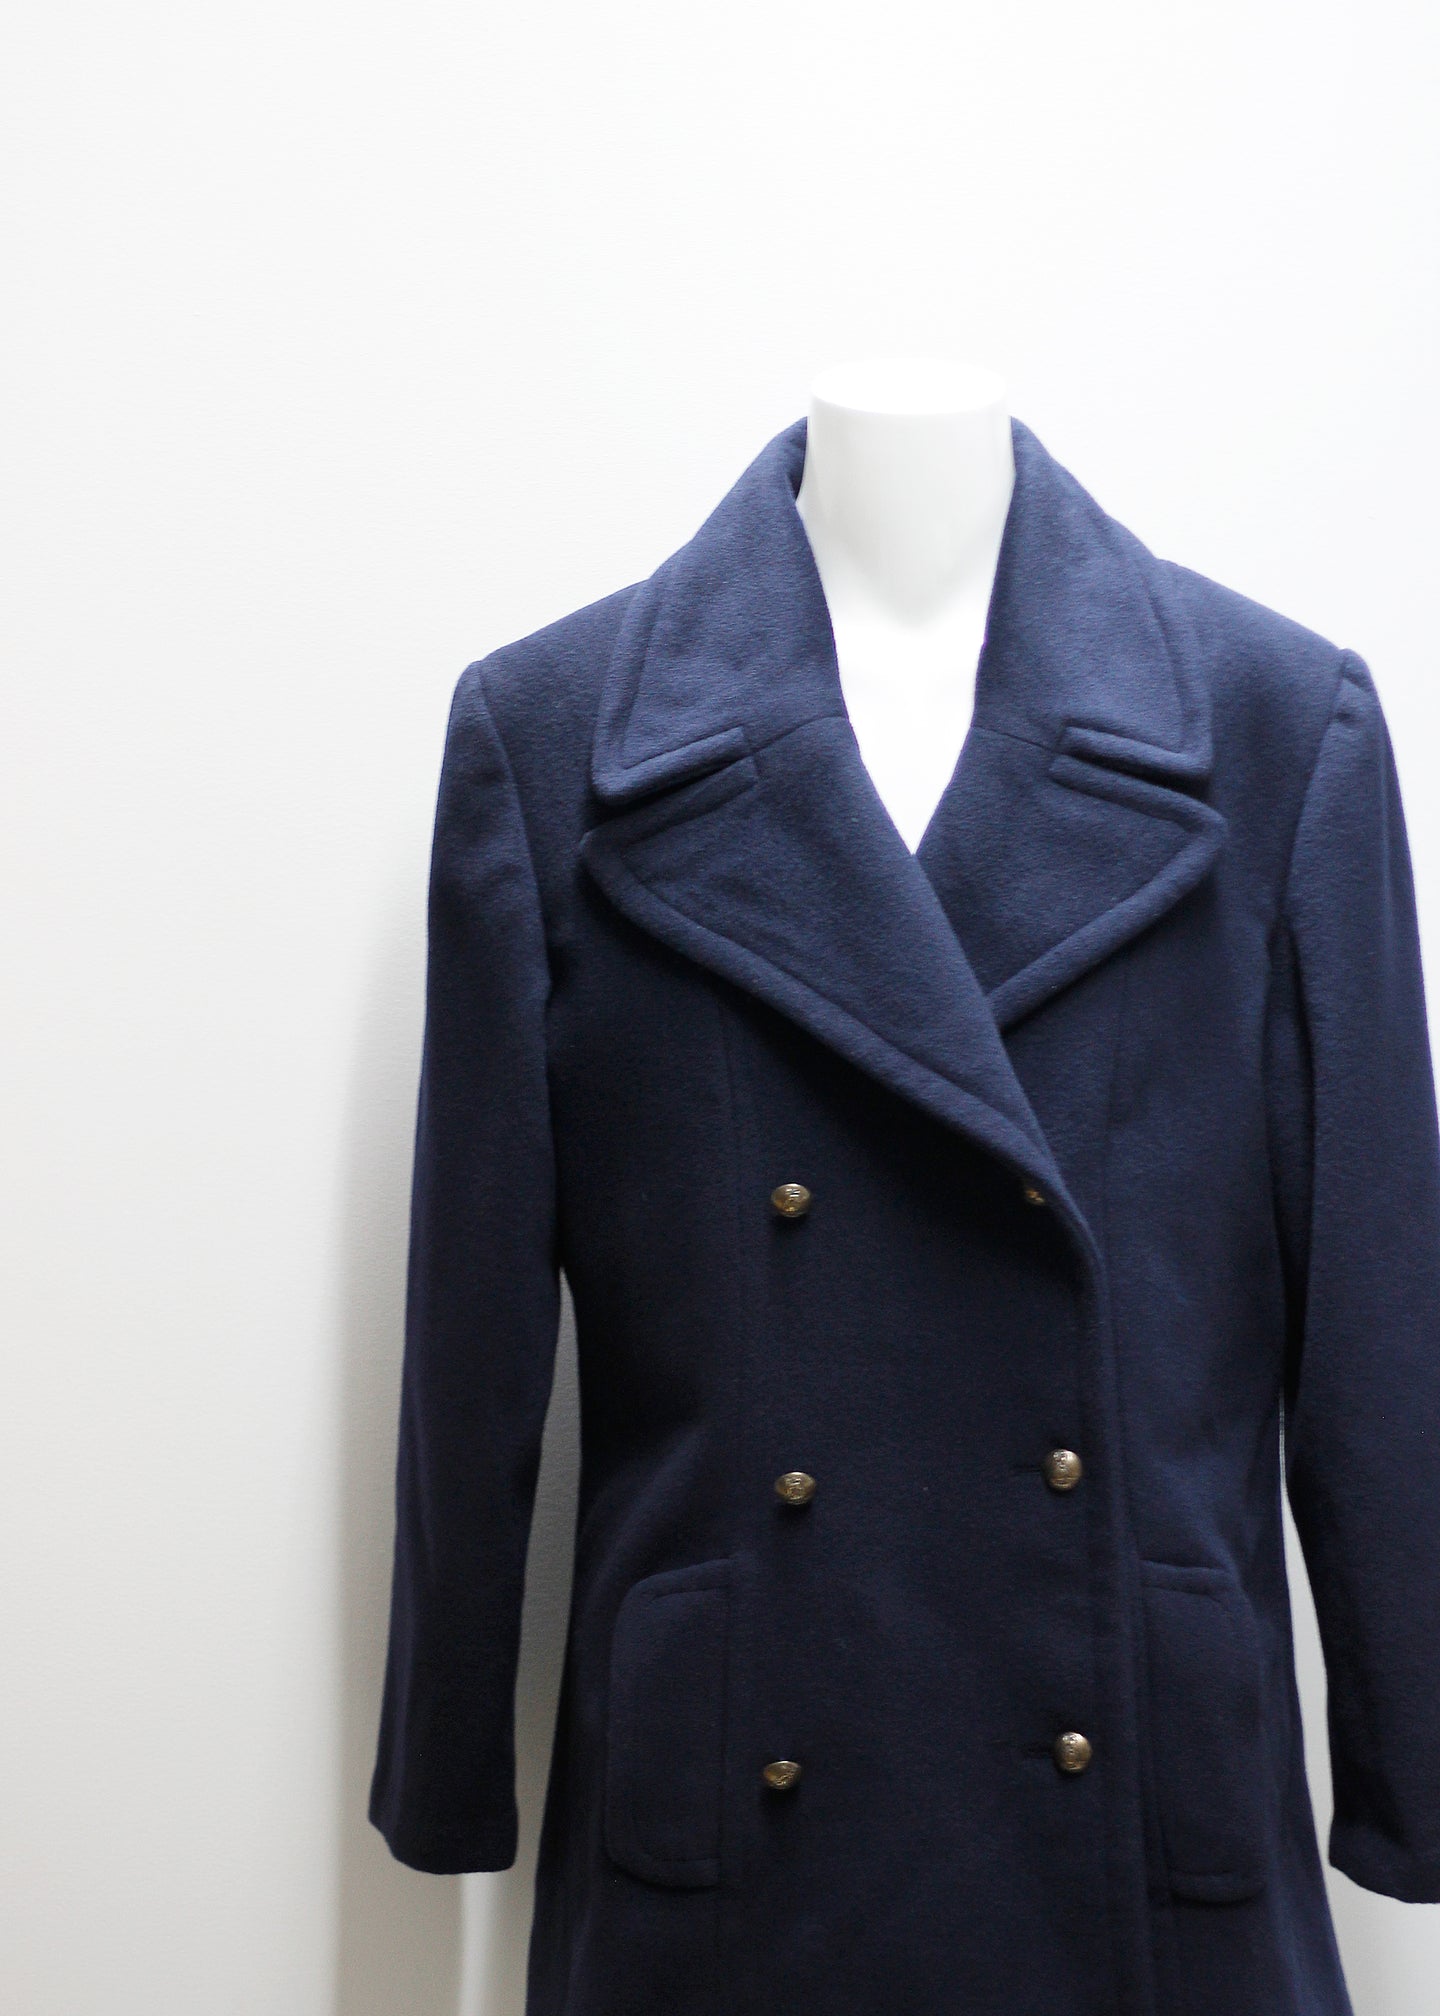 DOUBLE-BREASTED BLUE VINTAGE COAT, WOOL & CASHMERE